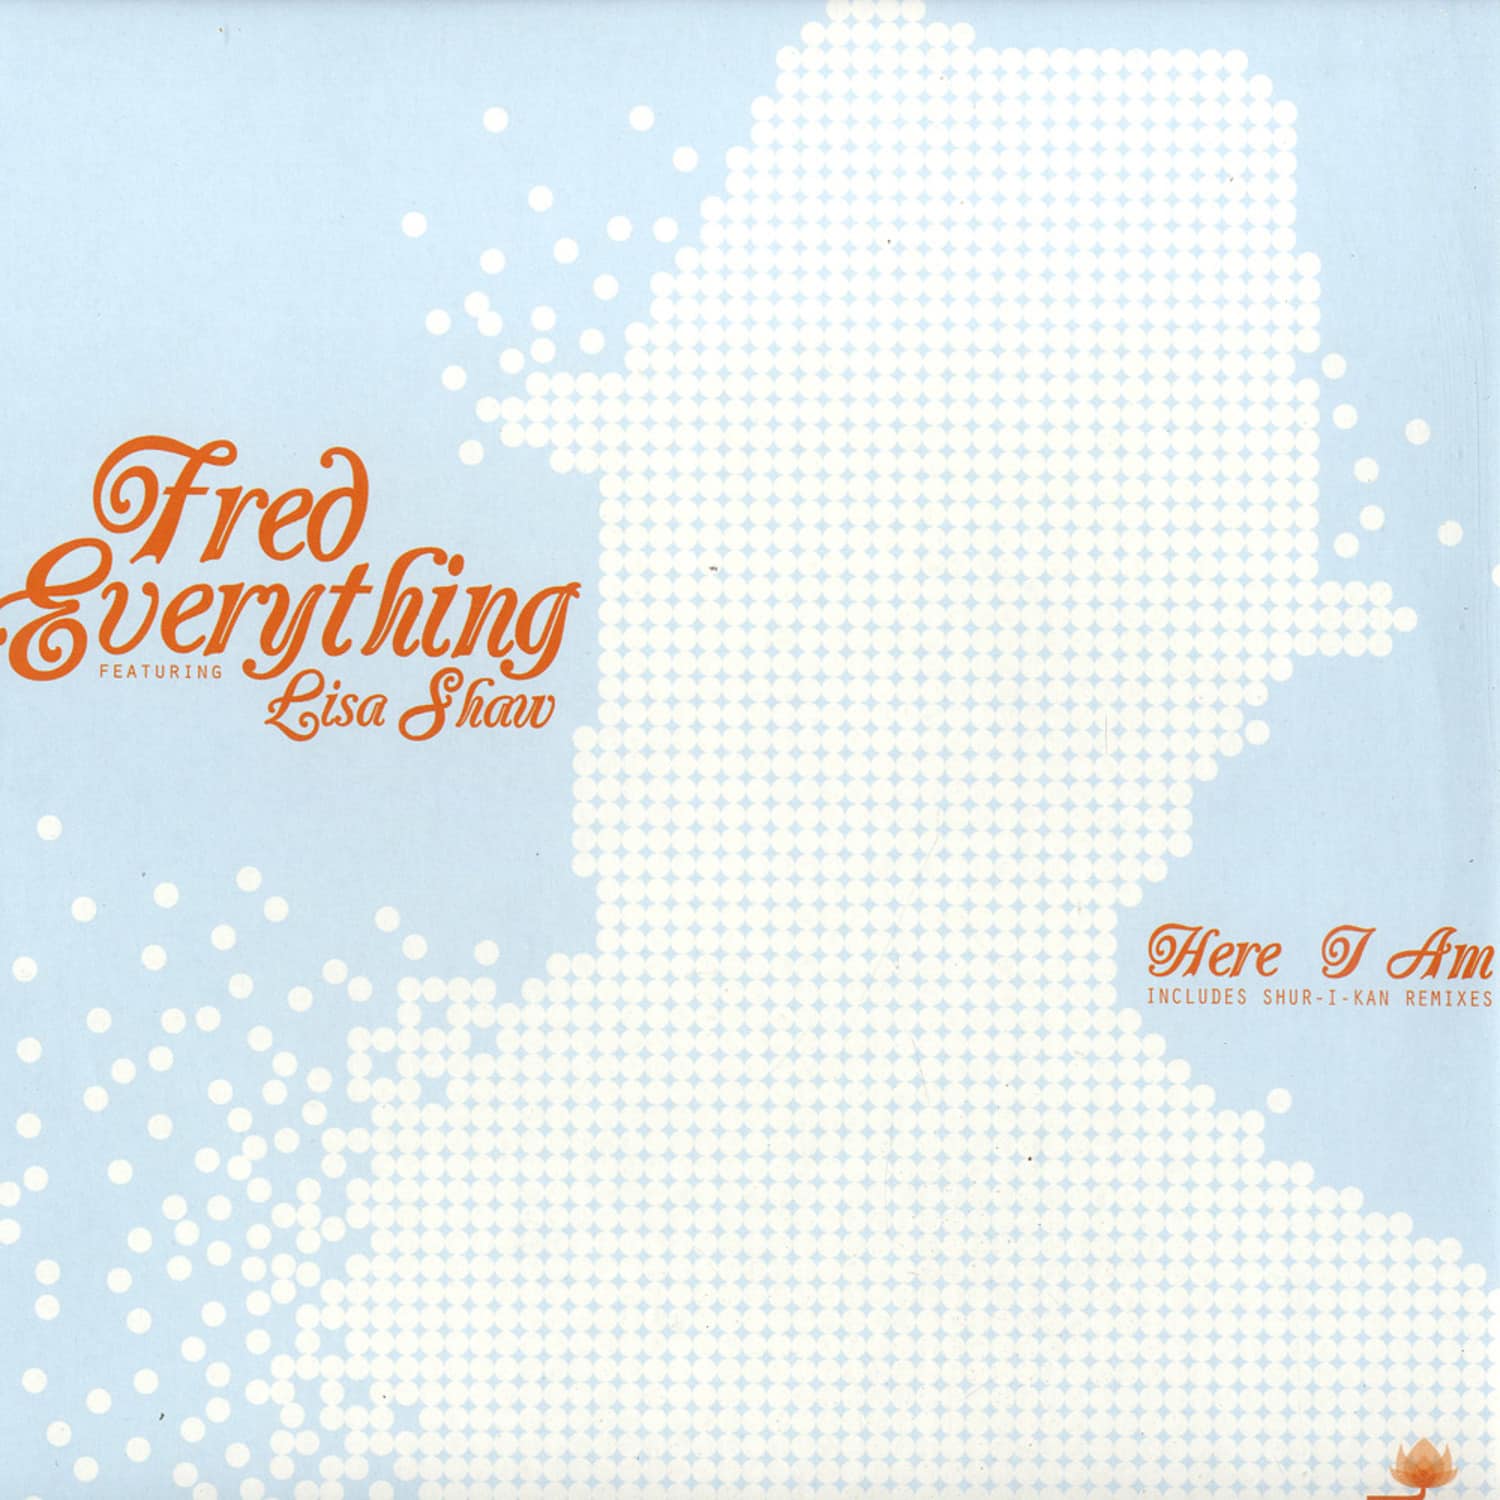 Fred Everything feat. Lisa Shaw - HERE I AM